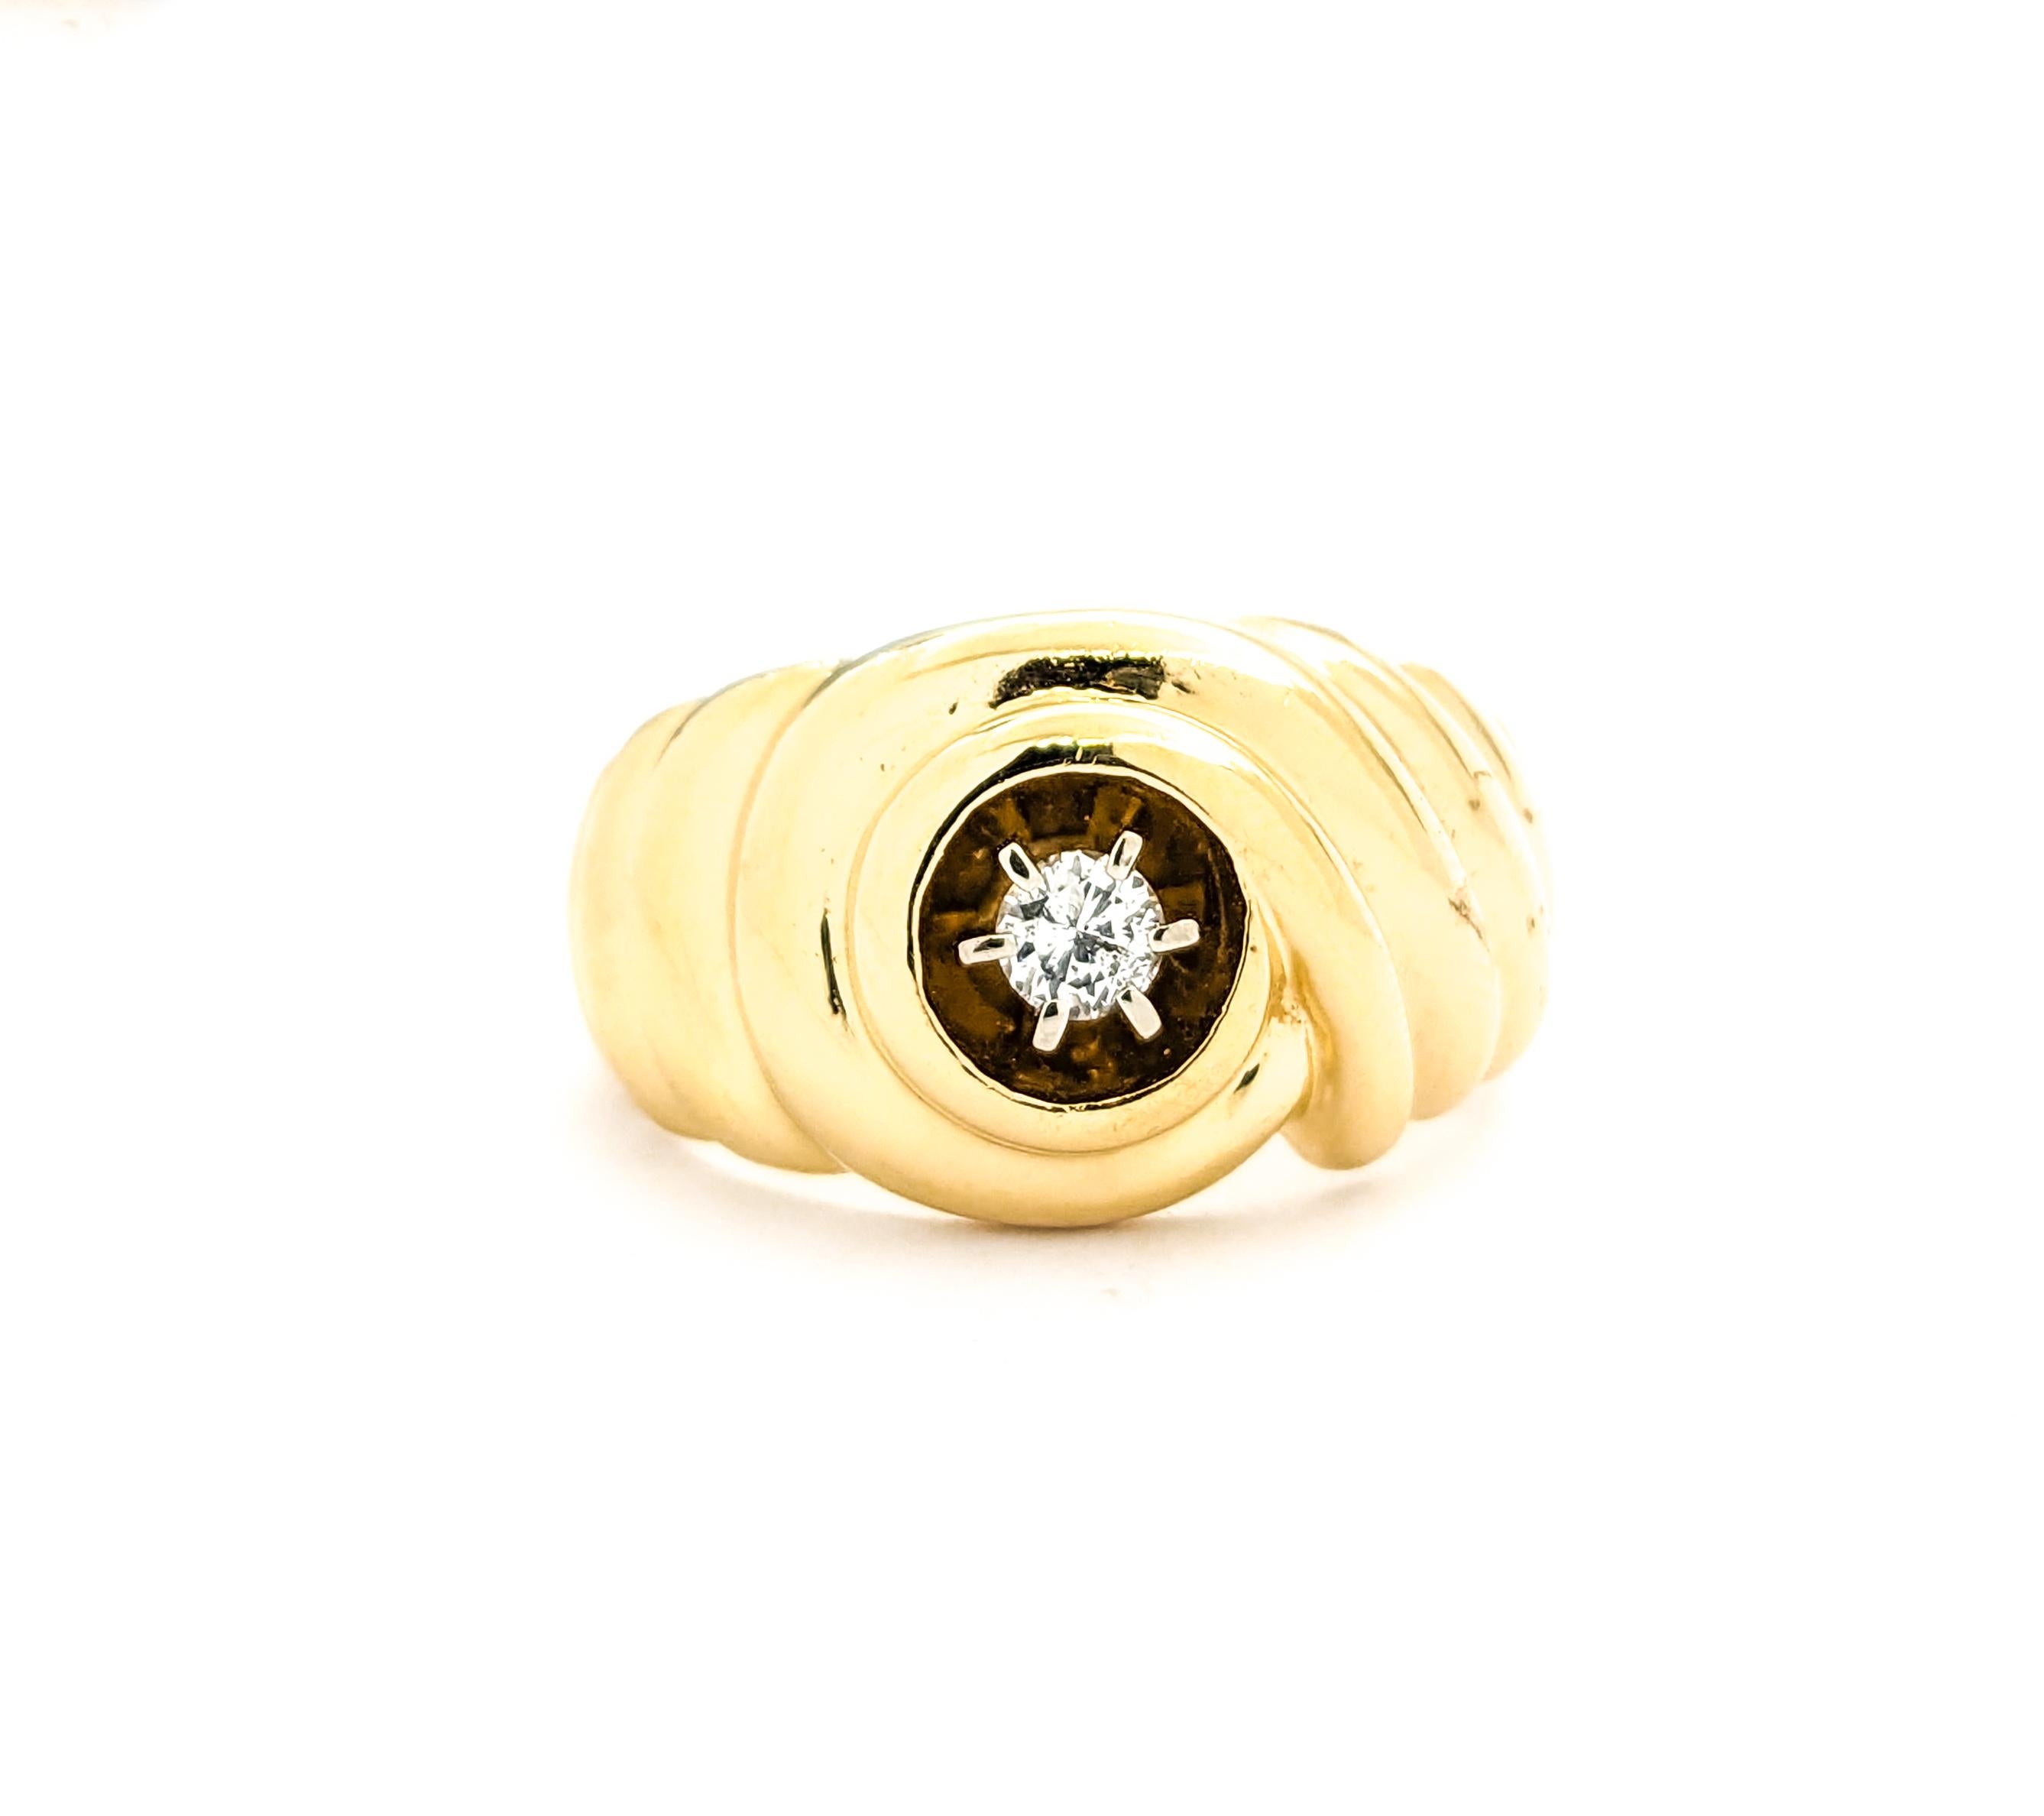 5ct Diamond Swirl Design Ring In Yellow Gold For Sale 2